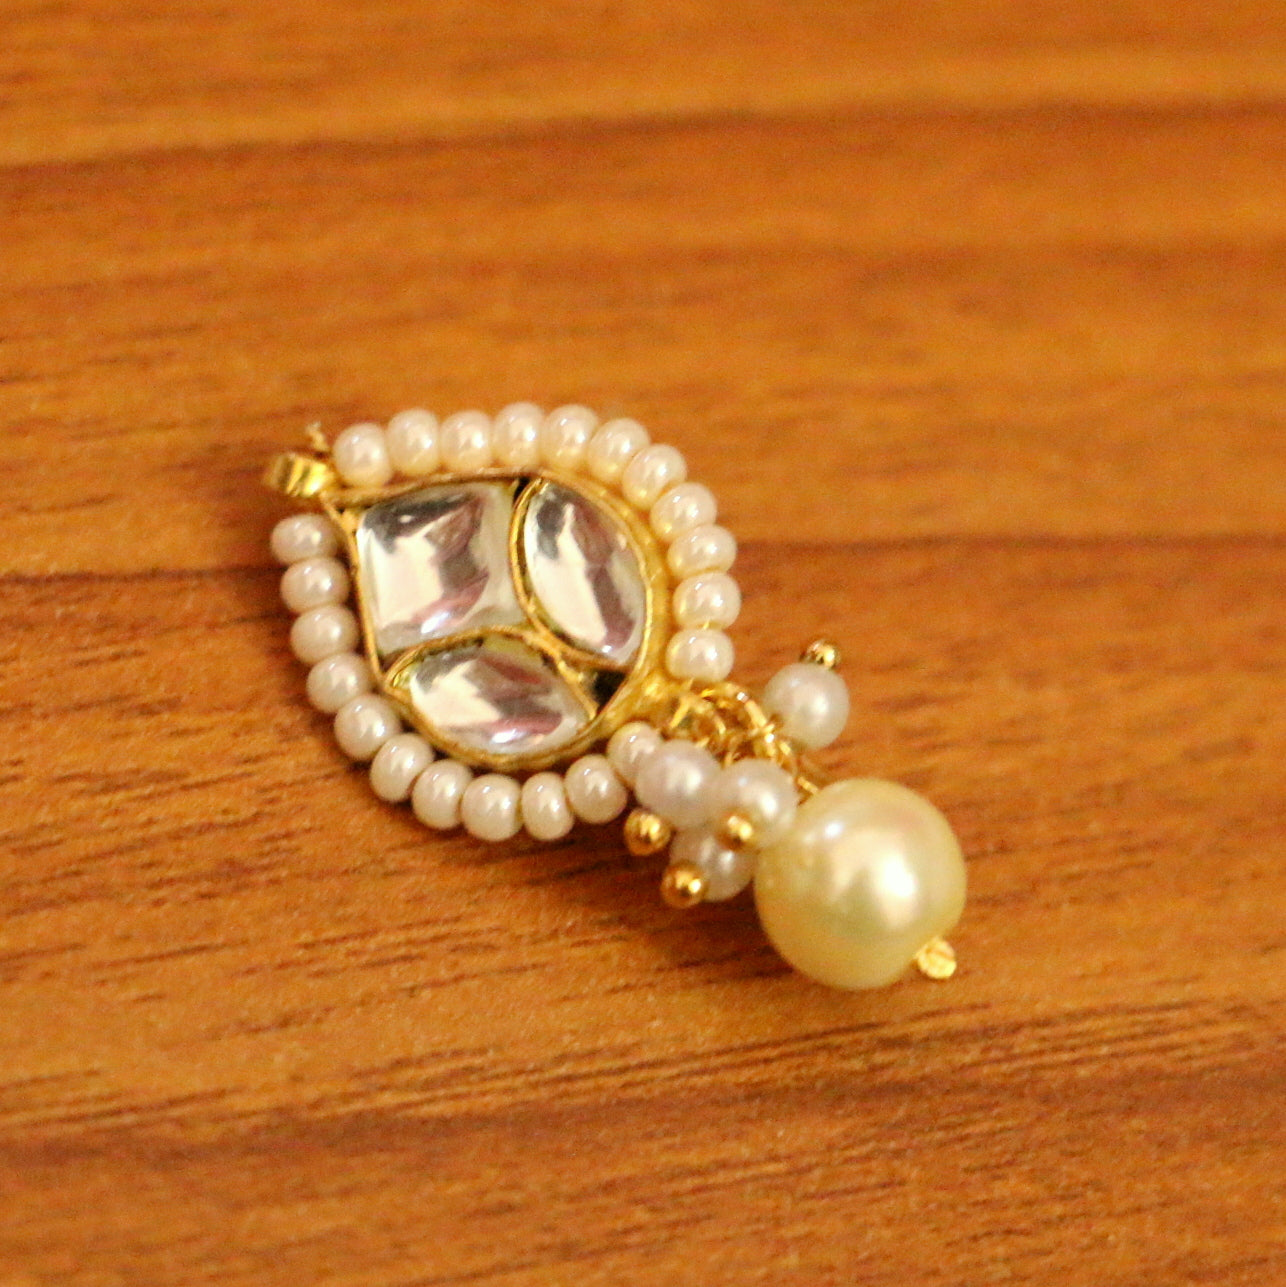 Pearl Nose Studs – A unique blend of bling and class! – Jpearls.com Blog